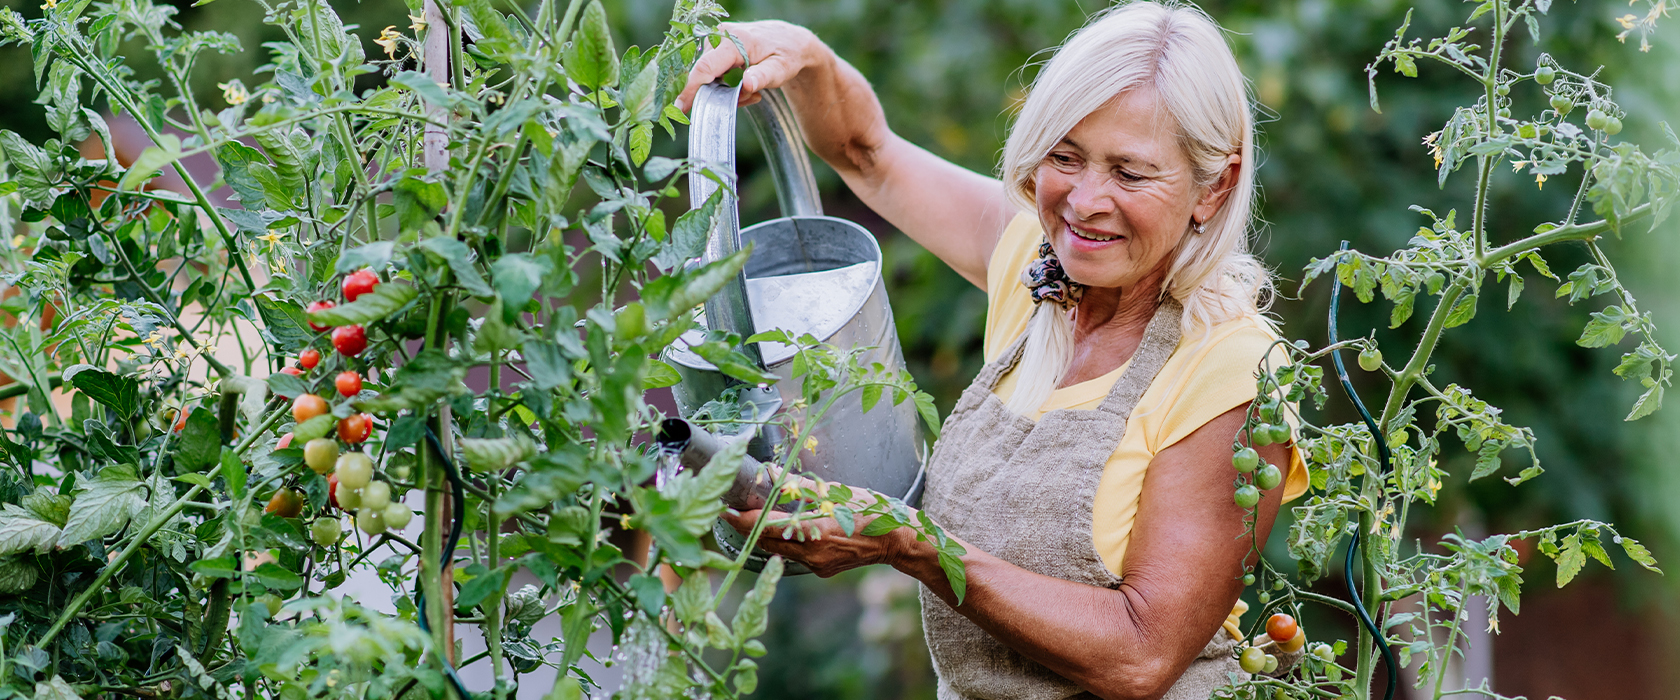 gardening tips for seniors what to grow